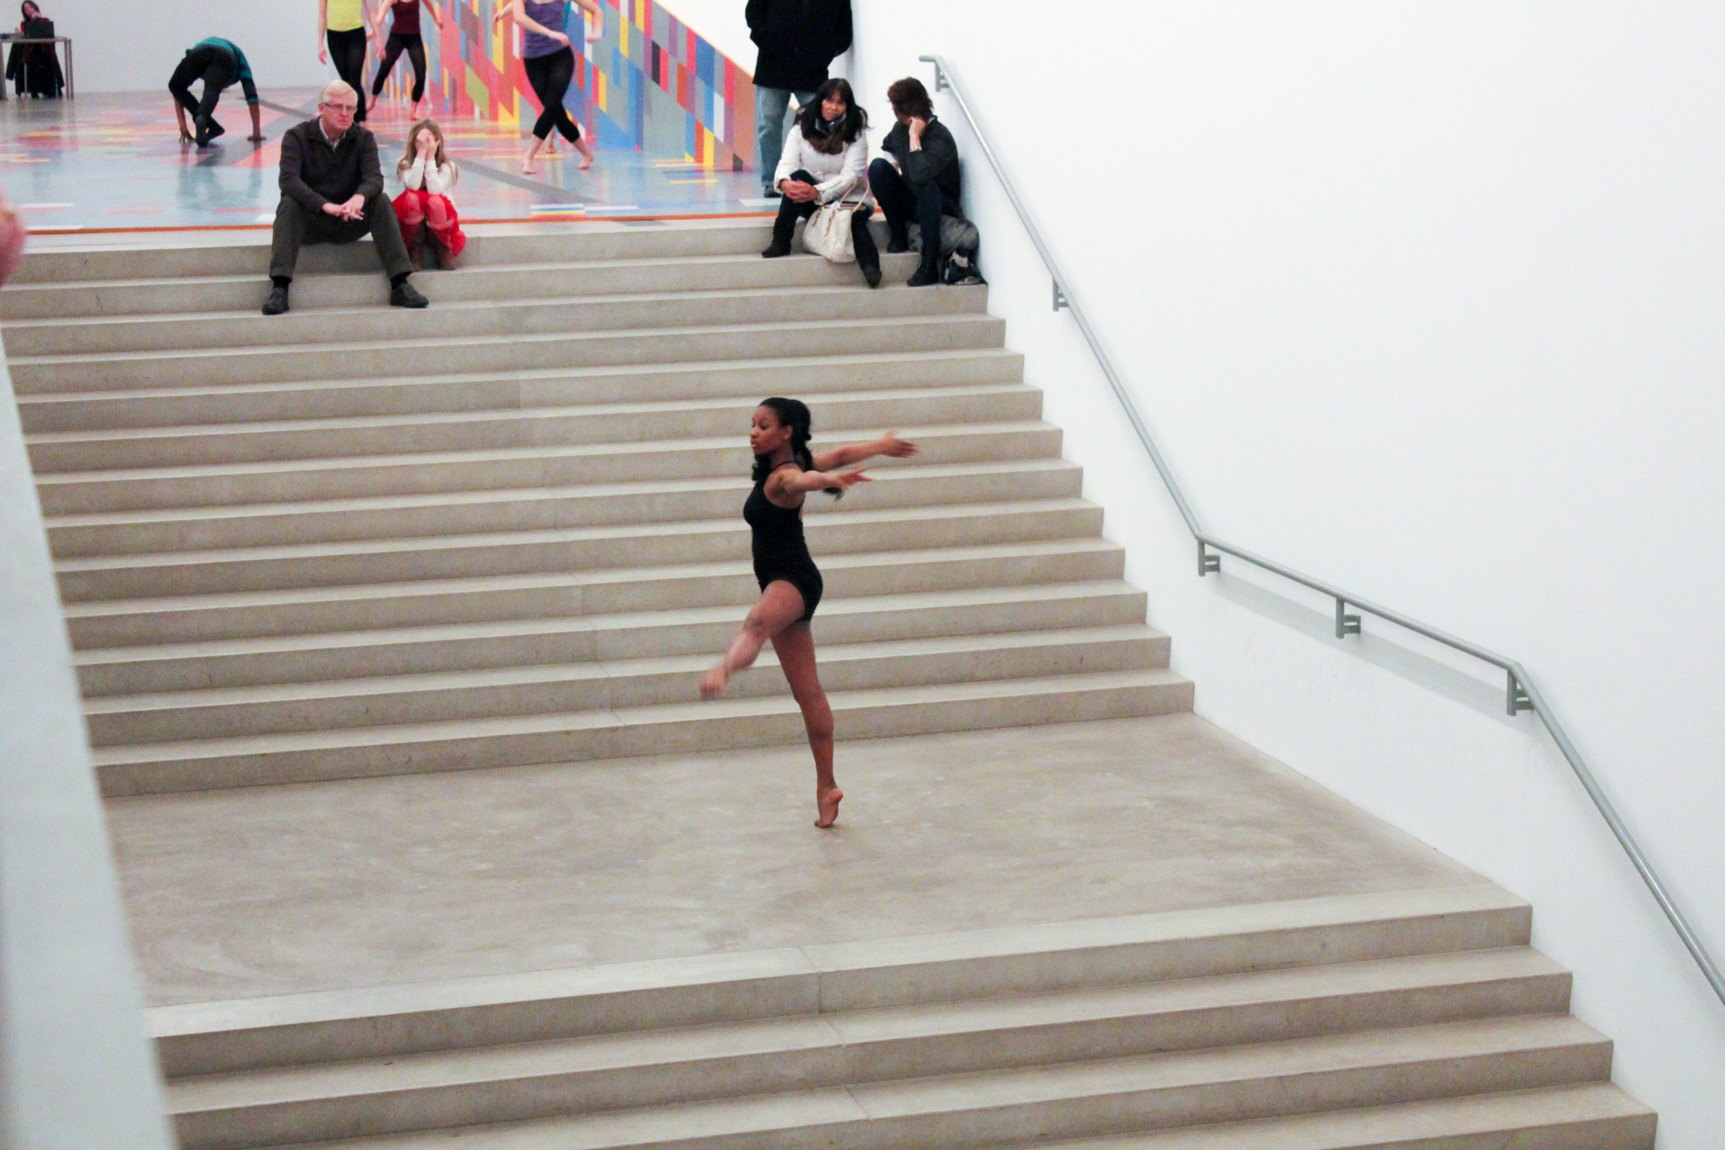 A COCA dancer performs in a black leotard on the Main Staircase for guests.